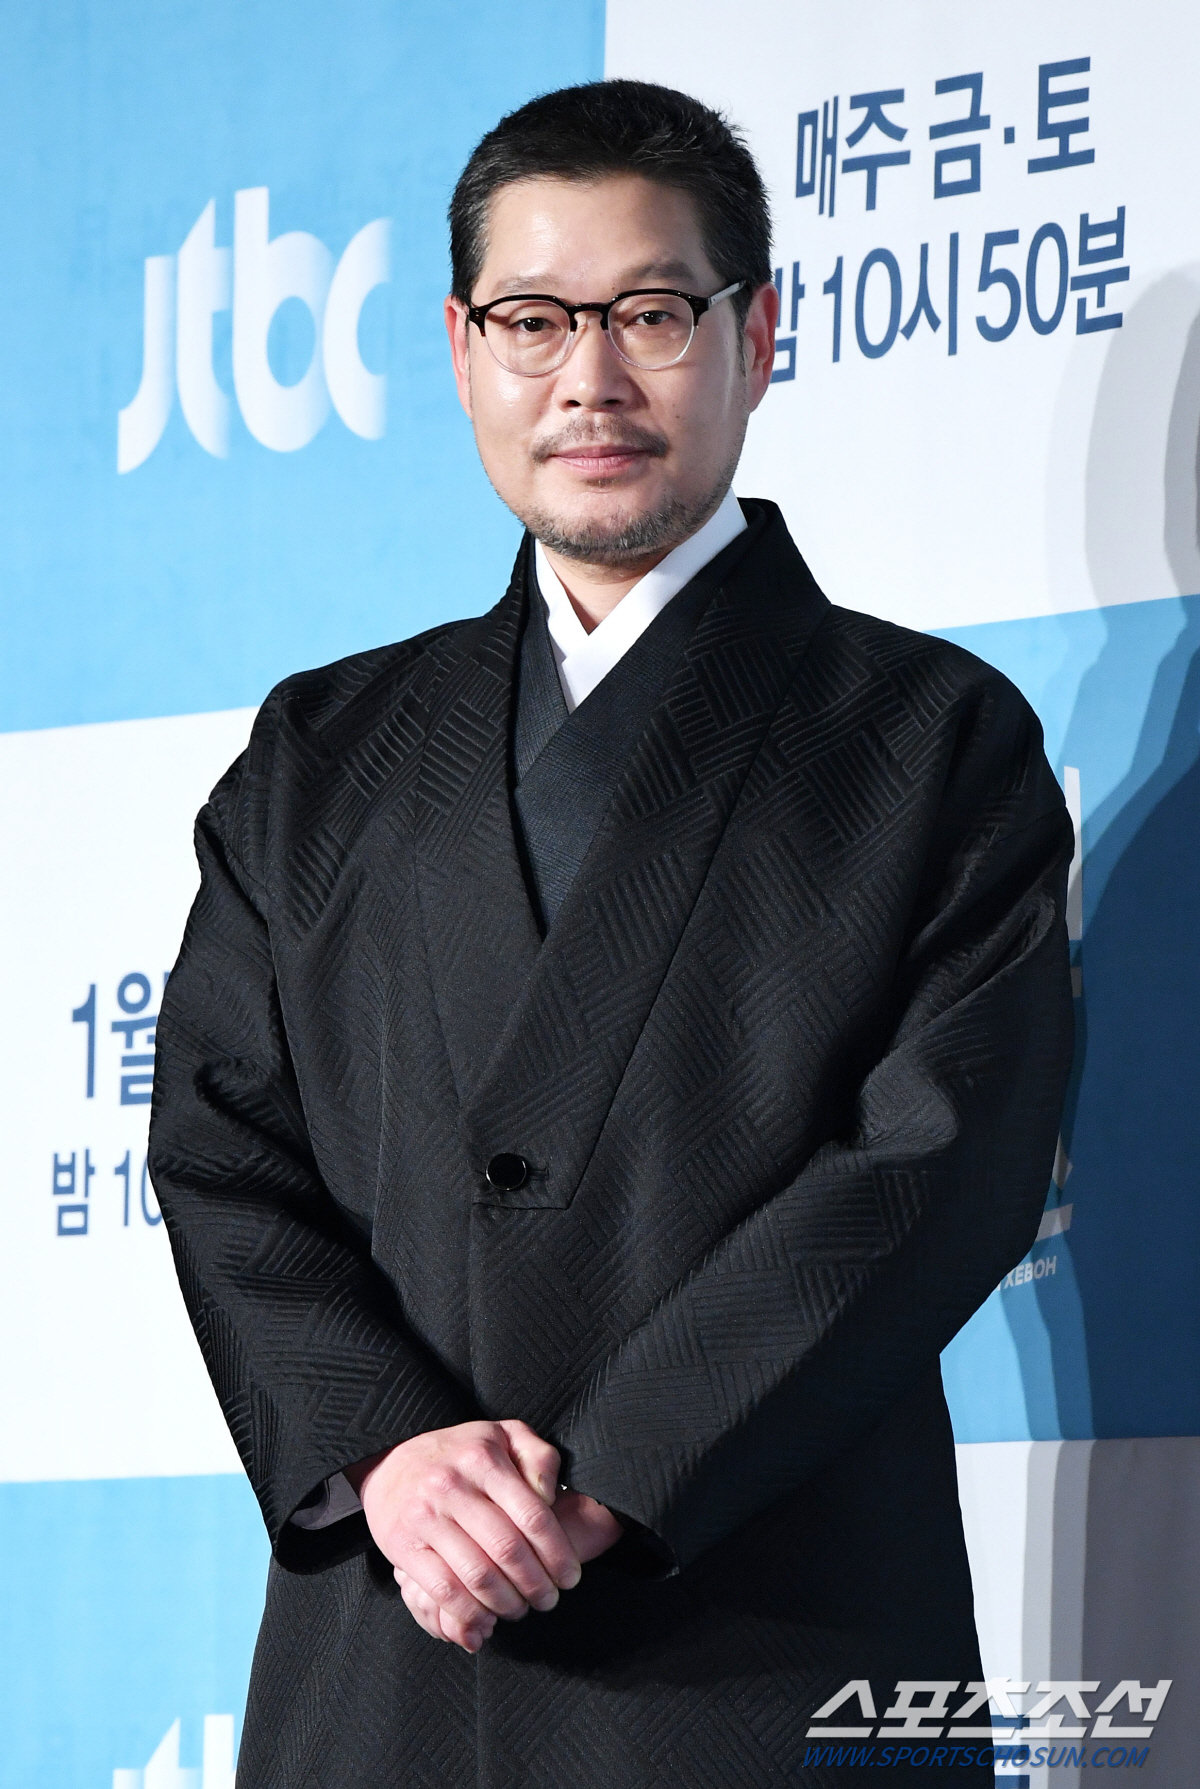 The Itaewon Class, which is 120 percent satisfied by the original author, matches the audiences eye level properly.On the afternoon of the 30th, JTBCs new gilt drama Itaewon Clath (directed by Jo Kwang-jin, directed by Kim Seong-yoon) was presented at the Conrad Hotel in Yeouido, Yeongdeungpo-gu, Seoul.The event was attended by Park Seo-joon, Kim Da-mi, Yoo Jae-myung, Kwon Na-ra, Kim Seong-yoon PD and Jo Kwang-jin.Itaewon Clath is a drama that moved the webtoon Itaewon Clath, which was evaluated as a story of youths living in an absurd world, to the CRT. Park Seo-joon, who was constantly mentioned in the virtual casting stage, joined the characters and raised the expectation of viewers.In particular, Kim Seong-yoon PD, who was recognized for his sensual production through Gurmigreen Moonlight and Discovery of Love, grabbed megaphone and wrote directly by Jo Kwang-jin, the author of Webtoon.Here, expectations are gathered as the first drama that Showbox, a production company that showed many movies with both workability and popularity such as Taxi Driver, Assassination and Tunnel.Park Seo-joon, who plays the main character, Park, said, Drama did not get out of the original because of the famous original Yi Gi.Drama is likely to be broadcast with a lot of more interesting stories added.As you have seen many times in the early days of Drama, there are many appearances of the original webtoon, and the artist also thought that it was important, and the reason why I was attracted to this drama was so interesting that I felt the charm that Remady wanted to express in the role. I think you can enjoy it, he added.Especially, Itaewon Class is expected to be a return of Park Seo-joon. In addition, it shows the toxic strength in youth, so the expectation of viewers is focused.I dont think I liked youths so I did Choices, and I think Im enjoying a lot of my youthful works because of the youth Yi Gi.This work also had a lot of fun with the original work rather than Choices because of the role of youth, and the role of the new Roy was very attractive in the original work, and I was wondering what I would like to express.That didnt mean I wanted to do it, but I think the coach offered me a suggestion that would give me this opportunity.I am trying to do well in this one, and I hope you will have fun. Kim Da-mi, who holds the side of Park Seo-joon firmly, is a well-known actor in the film industry to the extent that he won the 39th Blue Dragon Film Award for Best New Actress, but for the first time in Drama, Top Model: Kim Da-mi said, I first came across it as a webtoon, but it was interesting enough to read it all in three hours.I thought it would be fun to act because I thought it was a character that I did not see the character called Joe-yool Lee.I thought it would be difficult, but I also said that the bishop suggested that I could make my own Seo-yool Lee.Itaewon Class is a work written by Jo Kwang-jin, the author of Webtoon.Jo Kwang-jin said, When I was on the webtoon, I was chased by the weekly deadline, so I supplemented it because there were many regrets in Remady, and there were characters that I wrote only at a cost.There is no such thing as a refinement compared to Webtoon, but I have accumulated the characteristics of the characters in abundance, so there were no refinements while making it a drama.Jo Kwang-jin also said, I just laughed because it was an unexpected proposal when I first gave it to you.It is always attractive that what has moved my mind, that I have the opportunity and the first time to make up for myself, that I have never done it.So I liked my wife, but there were some things I thought easily.I was a cartoonist who did all the writing and painting, but I thought it was easy to write, but at first I felt the difference and was embarrassed.Fortunately, I met the director so well, and I think there are some parts that I think are the master, but I am learning a lot. I think there is no burden because there is a part that I believe now, and I think there are some strengths.Our drama flows into the carrier-centered Remady, and it was me at that time that the person who made the character knew the original character, the original character.So I thought those were the strengths.In the middle of the series, I thought that the public would come to the strength because I had a graph of statistics on where the enthusiastic and enthusiastic part of the drama is good, so I had experience in advance. Kim PD also said, I was worried that I would not be able to get rid of the ambassadors when I hit the ambassadors. I talked to the artist a lot and read a lot of actors.I was worried about what to do with the fluttering ambassador, but when I saw Park Seo-joon on the first round of shooting, I was really fluttering when I looked at the ambassador in the mirror.But Seo Jun did it, and it was too soft. This is an actors ability. The director gave me a one-and-a-half-time presentation.I think I drew a cartoon after watching Drama. The character Roy says it fits well with Park Seo-joon. Im glad the worries have eased.There are ambassadors, and I think it will be fun to watch how to do the process. I asked the artist in the process of adaptation, and it was a fun point that Itaewon was the background.The story of the business that the log line is based on Itaewon in the obvious story Yi Gi was attractive.Among the interesting characters, I thought it would be fun if a foreigner who can not speak English entered, so I put in a part-time job, and the artist made a remady again.It seems to be another fun point to see his Remady Jo Kwang-jin writes about the cast of actors, I am 120% satisfied.When I wrote God and wrote in the video, I thought I knew the character best when I first wrote it, but from a certain point on, I saw the actors interpret and implement it more intensely than I did, but I was not a tearful god.Looking at it, I thought, This is 120%.I am so satisfied, he said. I think the synchro rate of Roy is the highest. He also raised expectations for the webtoon Itaewon Class implemented by Drama.Itaewon Class is the first drama produced by filmmaker Showbox.Kim Seong-yoon PD said: There was a freshness given by the union as well as the Drama that Mr. Park Seo-joon does.Actors act because they want to wear other clothes, and they are wearing character clothes that actors can call Top Model in their characters.In that sense, the artist also has the title of the first drama author, so I have a trembling as the first drama in JTBC.I wonder if Showbox would have been the top model with that feeling, so I think it was the suggestion to me.We are hoping that the director of Namsan is doing well, so we want to be influenced by it.The sum of the actors is the best: especially the breathing of Yoo Jae-myung and Park Seo-joon, who represent the new generation, also maintains 100%.Yoo Jae-myung said, The complex emotions that I feel while watching the age-old confrontation, the appearance of the younger generation, and the appearance of the younger generation, which does not resemble, seem to be seeing my childhood self exist throughout the work and breathe with the Park Seo-joon actor.Even if you do not explain it, Baro shoots after rehearsal, OK, and Baro returns. Park Seo-joon also said, The rehearsal is long, so I breathe perfectly in it. If it is insufficient, I will not have enough acting part.I am following you because you are so good at it. Without Chang, I think he was a person who gave me so much stimulus that I thought the new Roy could be born.I think it is a work that has a lot of synergy in many ways. Itaewon Class has a target audience rating of 10%; Park Seo-joon said: Principles are a burden every time you do a new work, I think you should think about something.I thought it would be good if I came out well and I could express my promises even if I had less, but I hope it would be double digits. 10% would be really great.Of course, I dont think the hard work of actors and directors is expressed by the audience rating, and if thats the case, the wings will run.Our drama is a story of the food industry Yi Gi, so we have a catcher called Sweet Night, so we talked with the bishop about how to try it as an event.I think it would be nice to have a time with viewers in real life. If it is two seats, I would like to have a drink with viewers in the stalls. It will be broadcast first at 10:50 p.m. on the 31st.